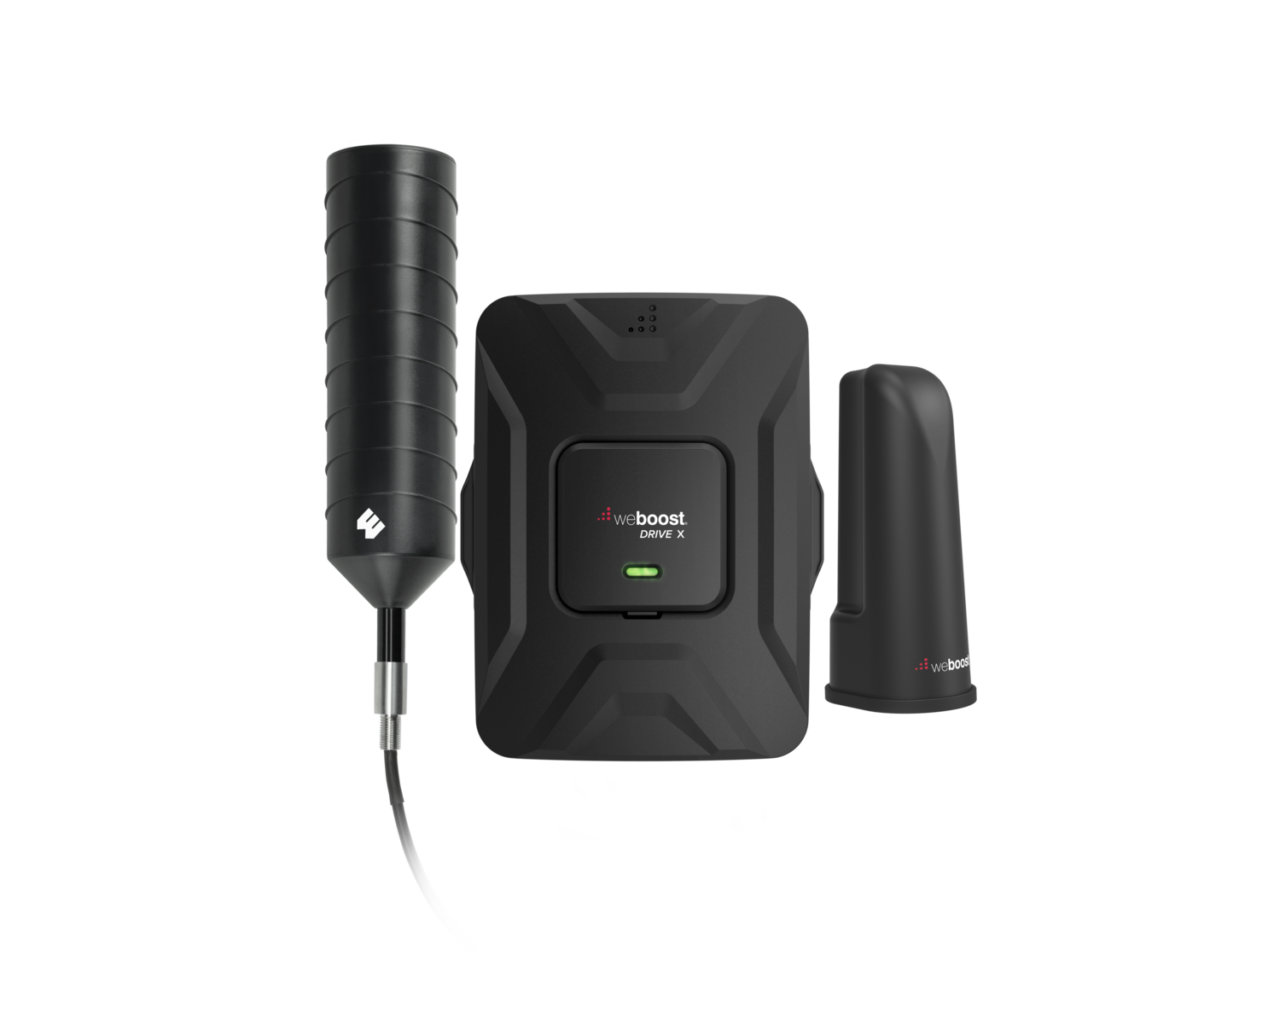 Introducing the Reimagined Drive X RV Cell Phone Booster